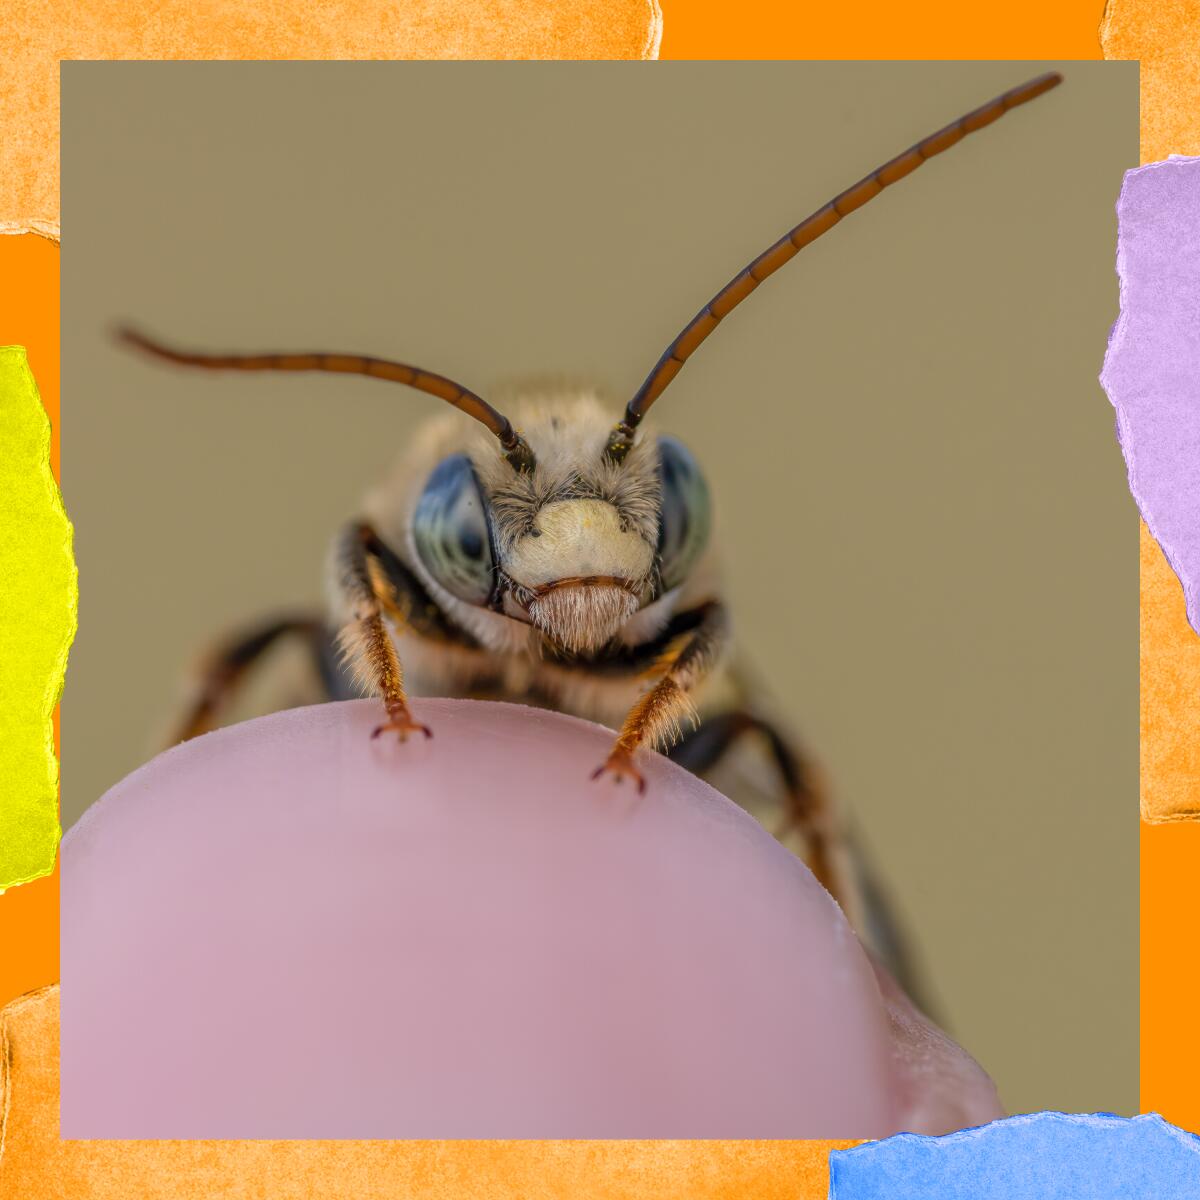 Furry insect on a finger